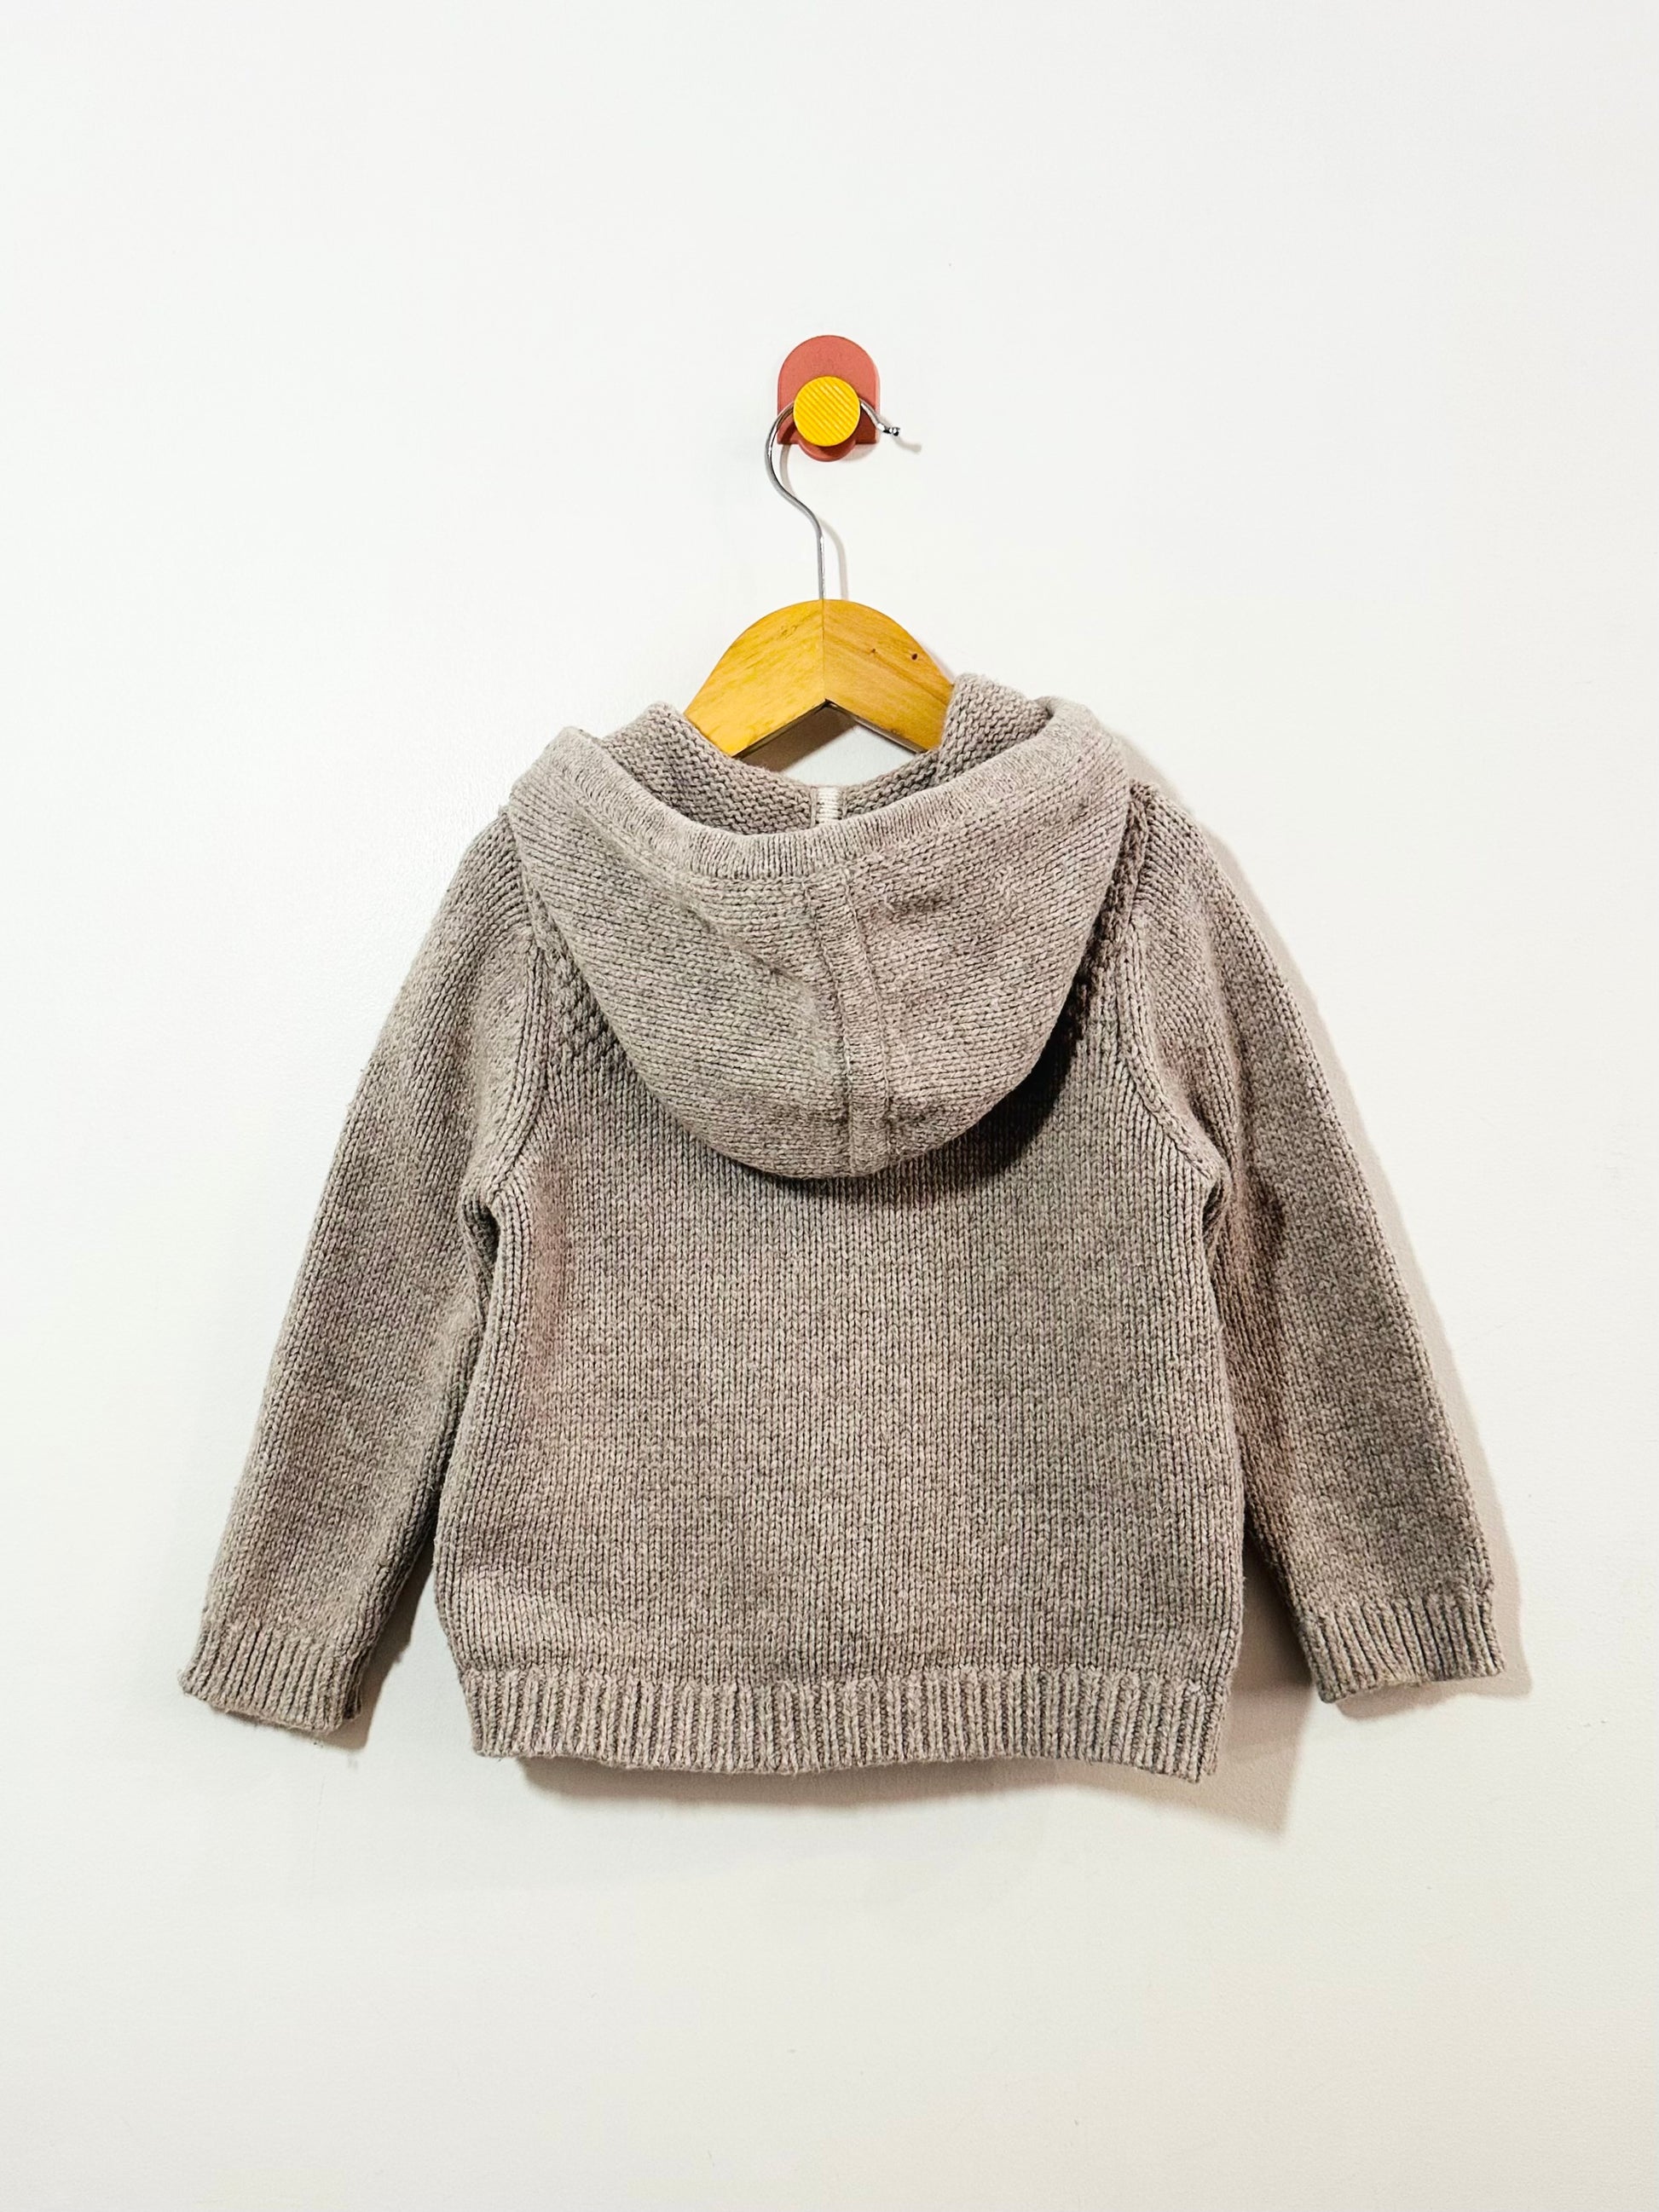 Baby Boden Hooded Sweater / 18-24